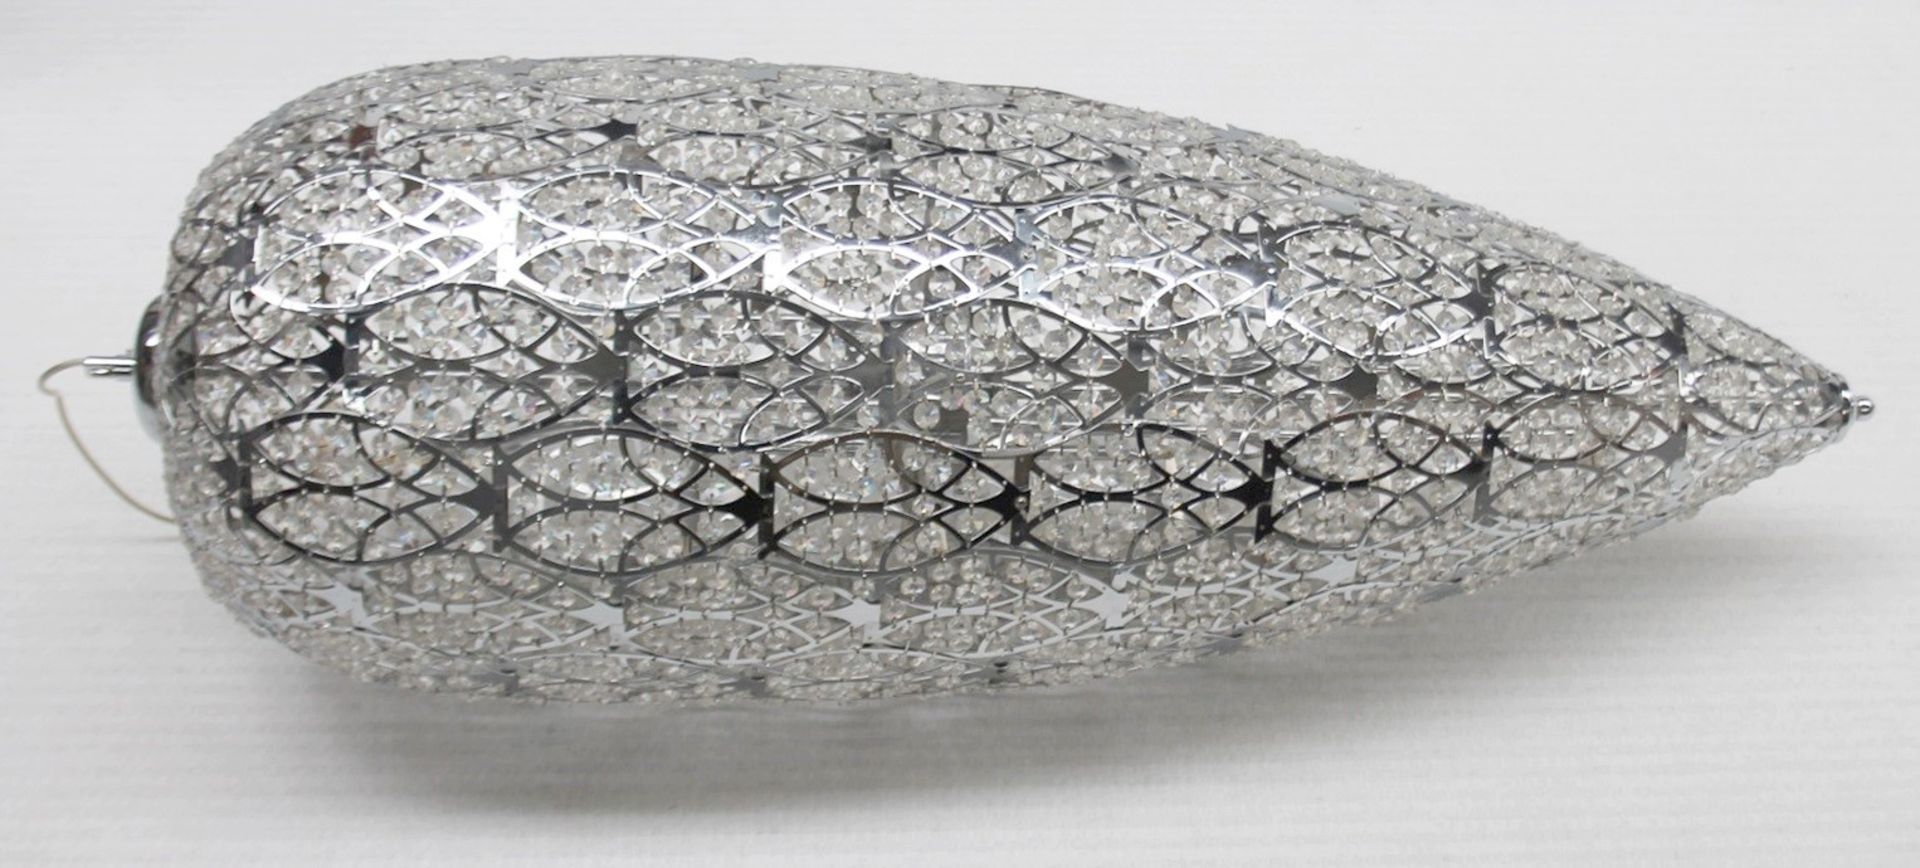 1 x High-end Italian LED Light Fitting Encrusted In Premium ASFOUR Crystal Elements - Approximate - Image 3 of 8